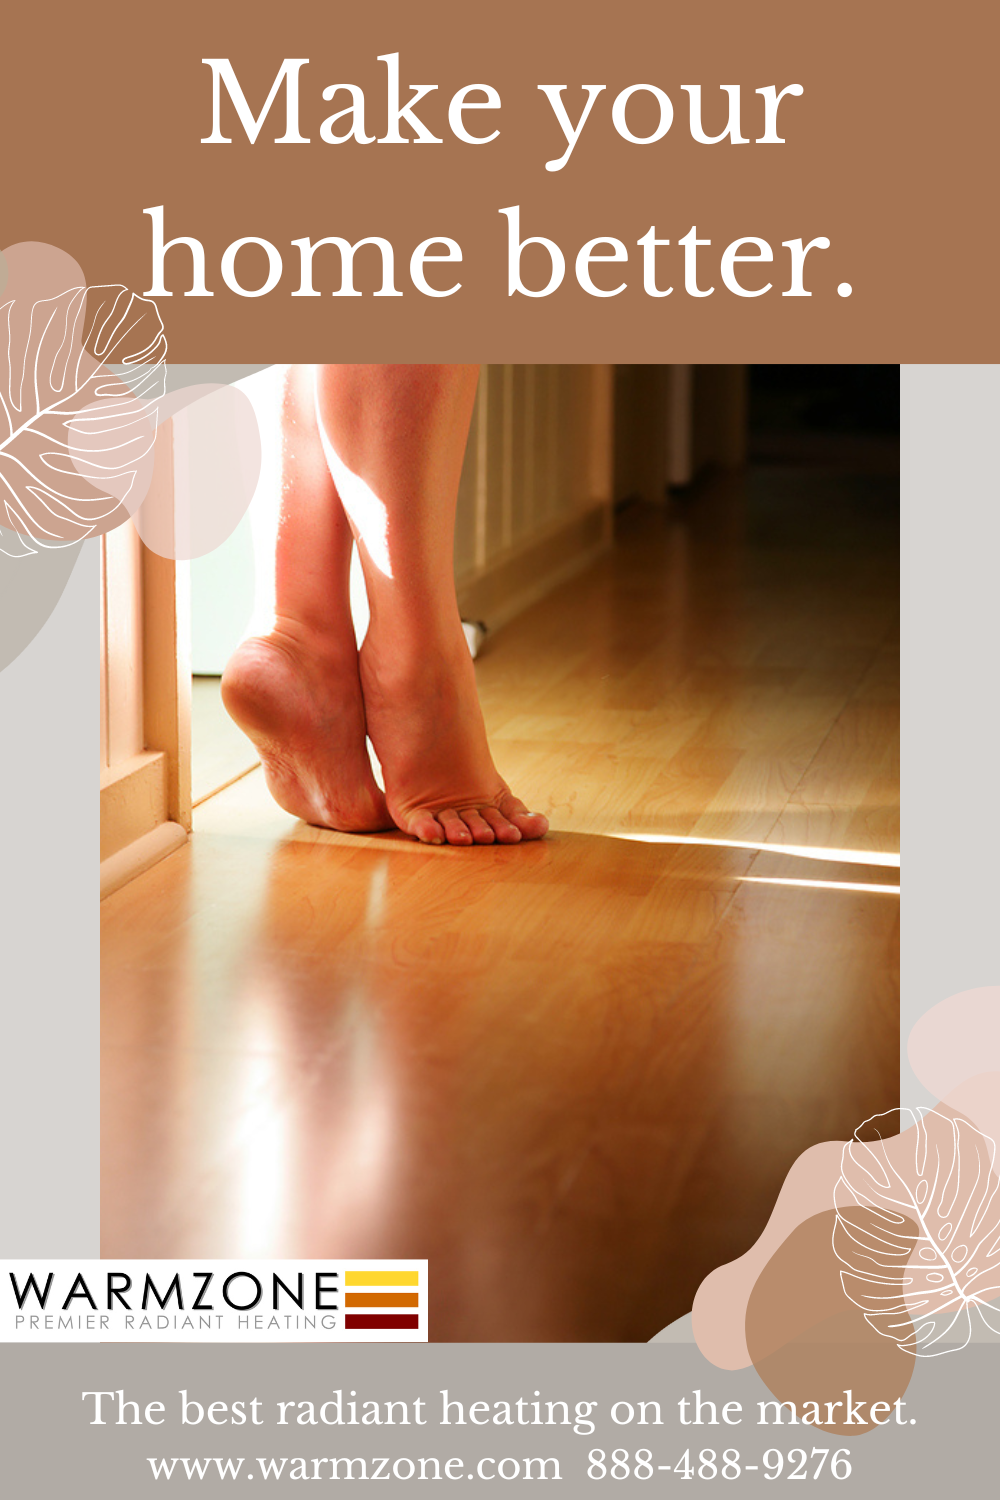 Give your home a warm boost with Warmzone premier radiant heating.